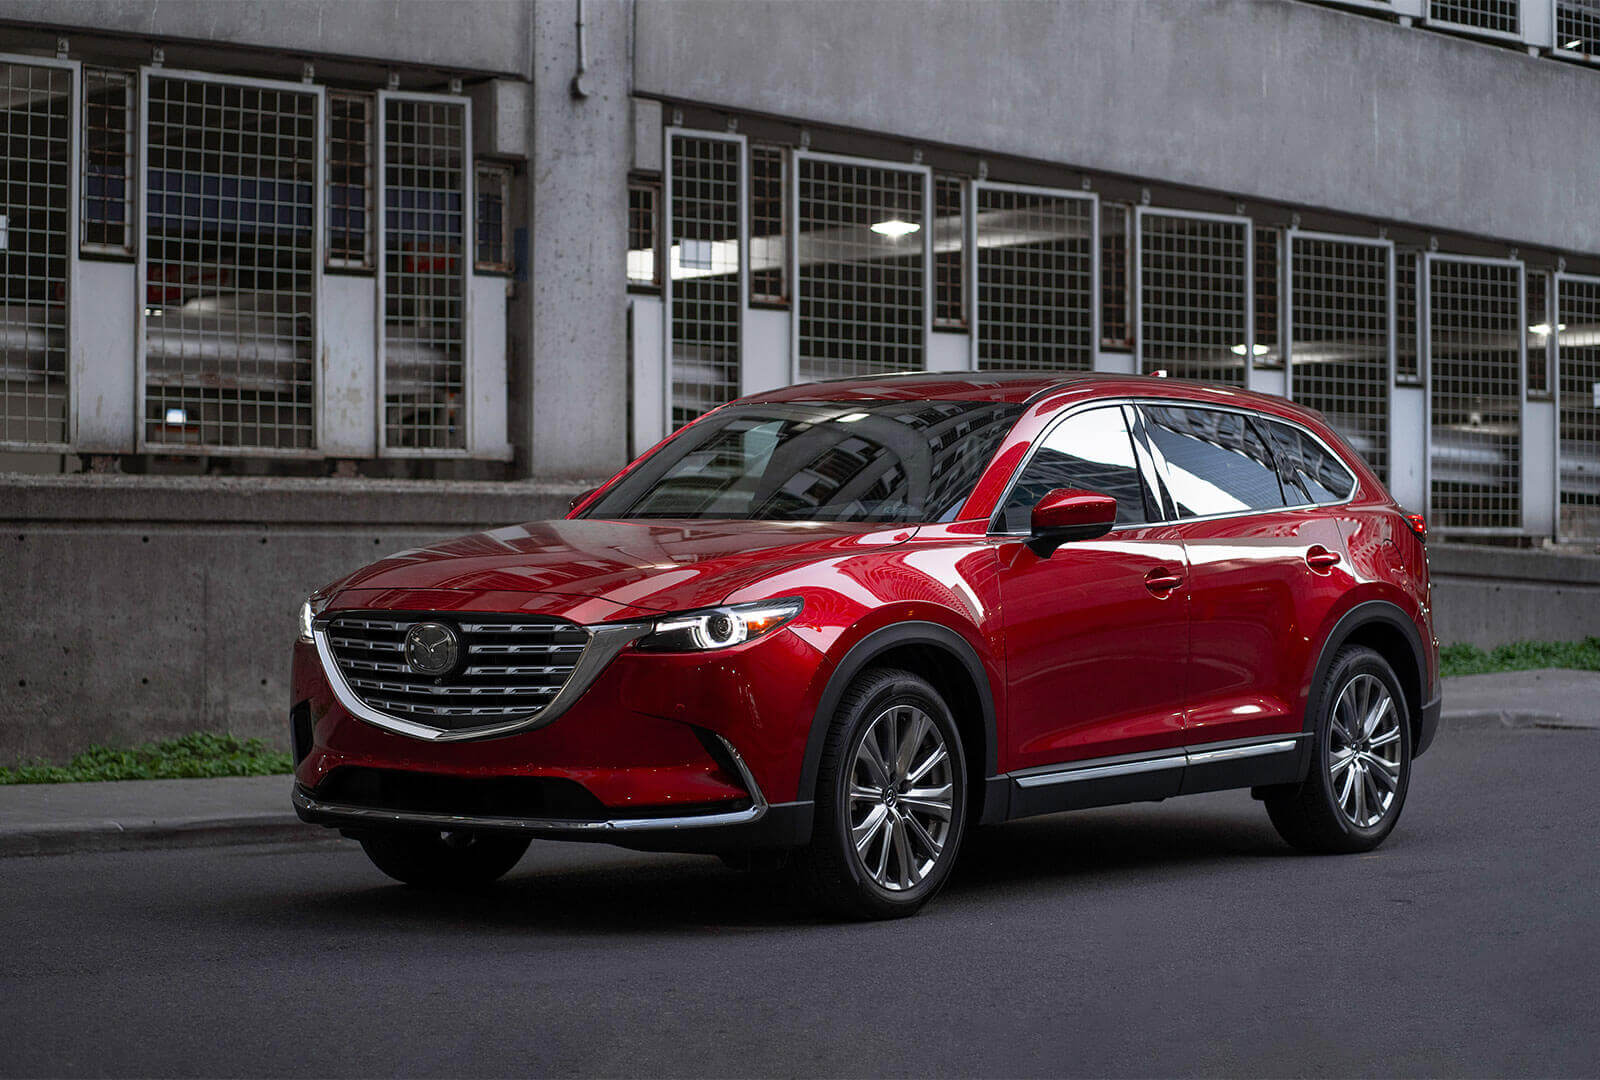 Red CX-9 stopped in front of parking garage.